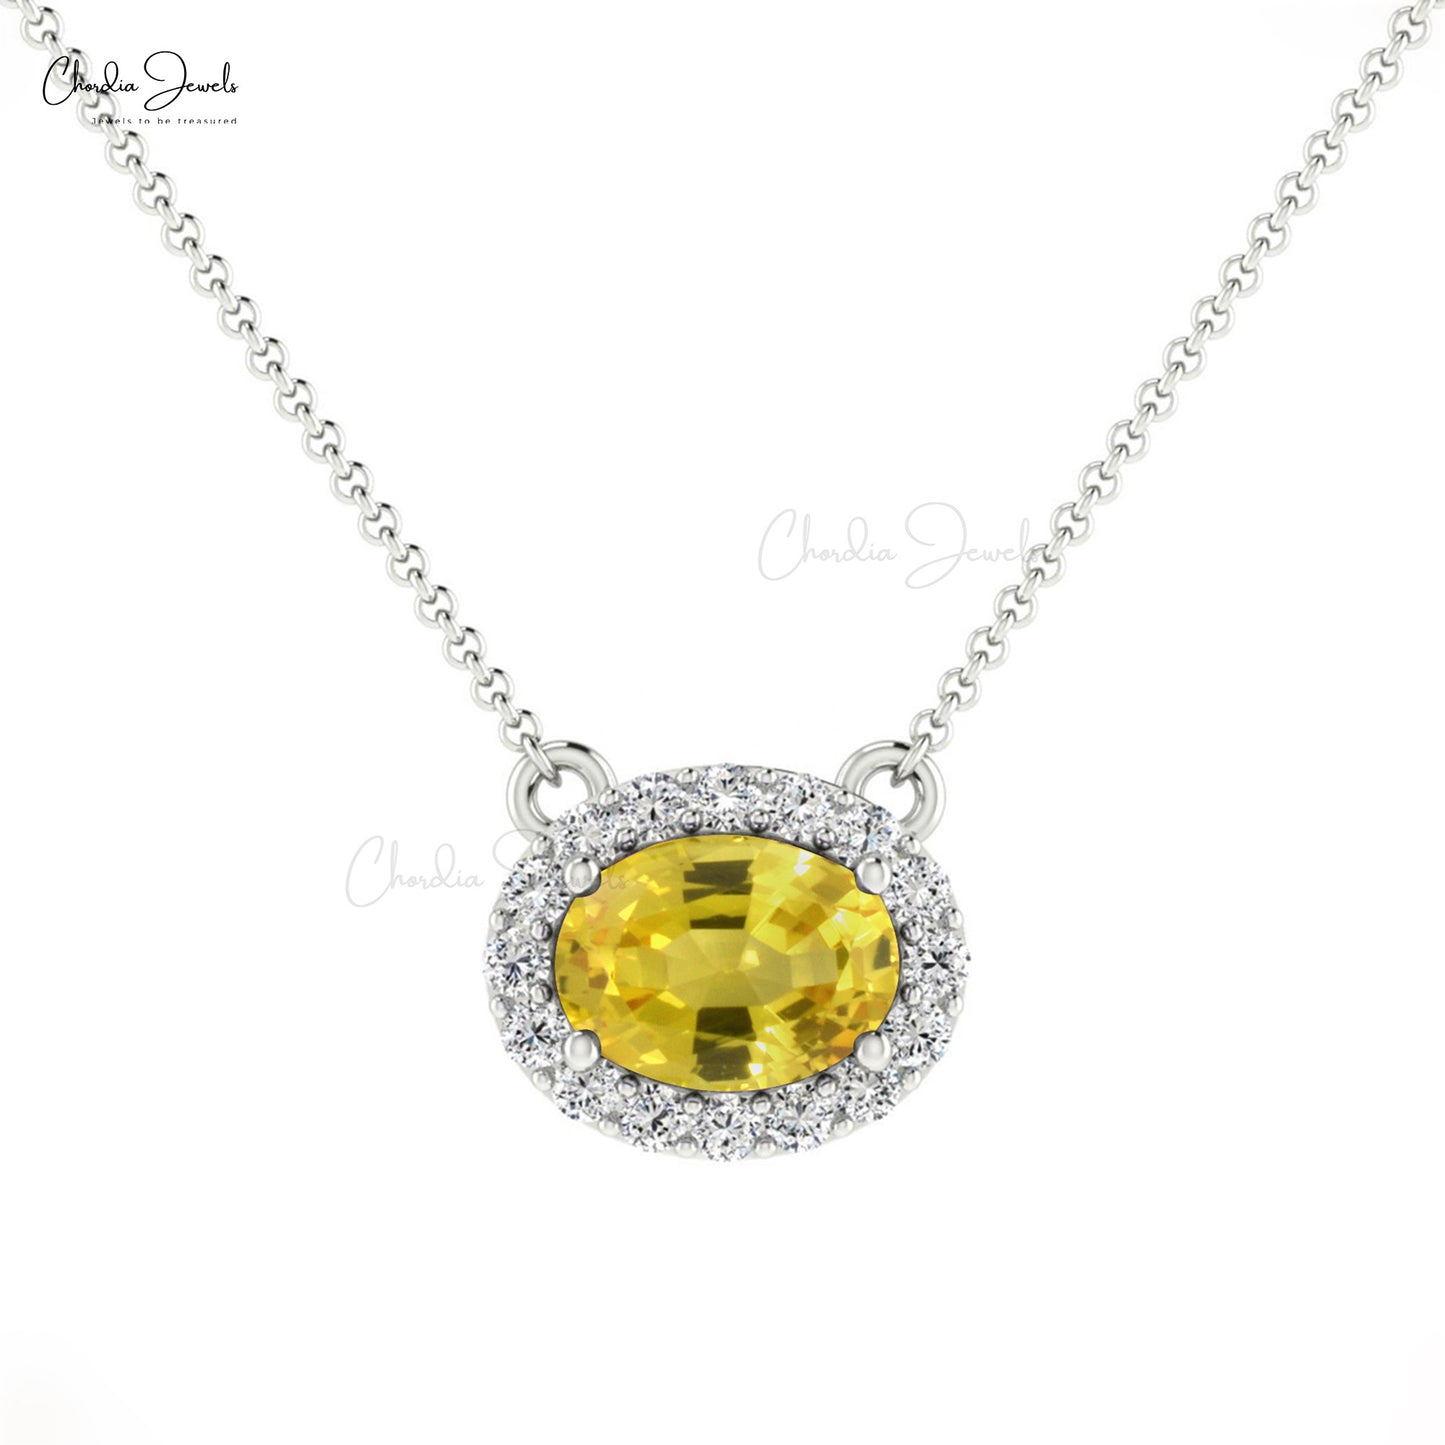 7x5mm Oval Faceted Gemstone Necklace, 14k Solid Gold Diamond Necklace, Natural Yellow Sapphire Necklace, Bridesmaid Necklace, Handmade Necklace, Gift for Her